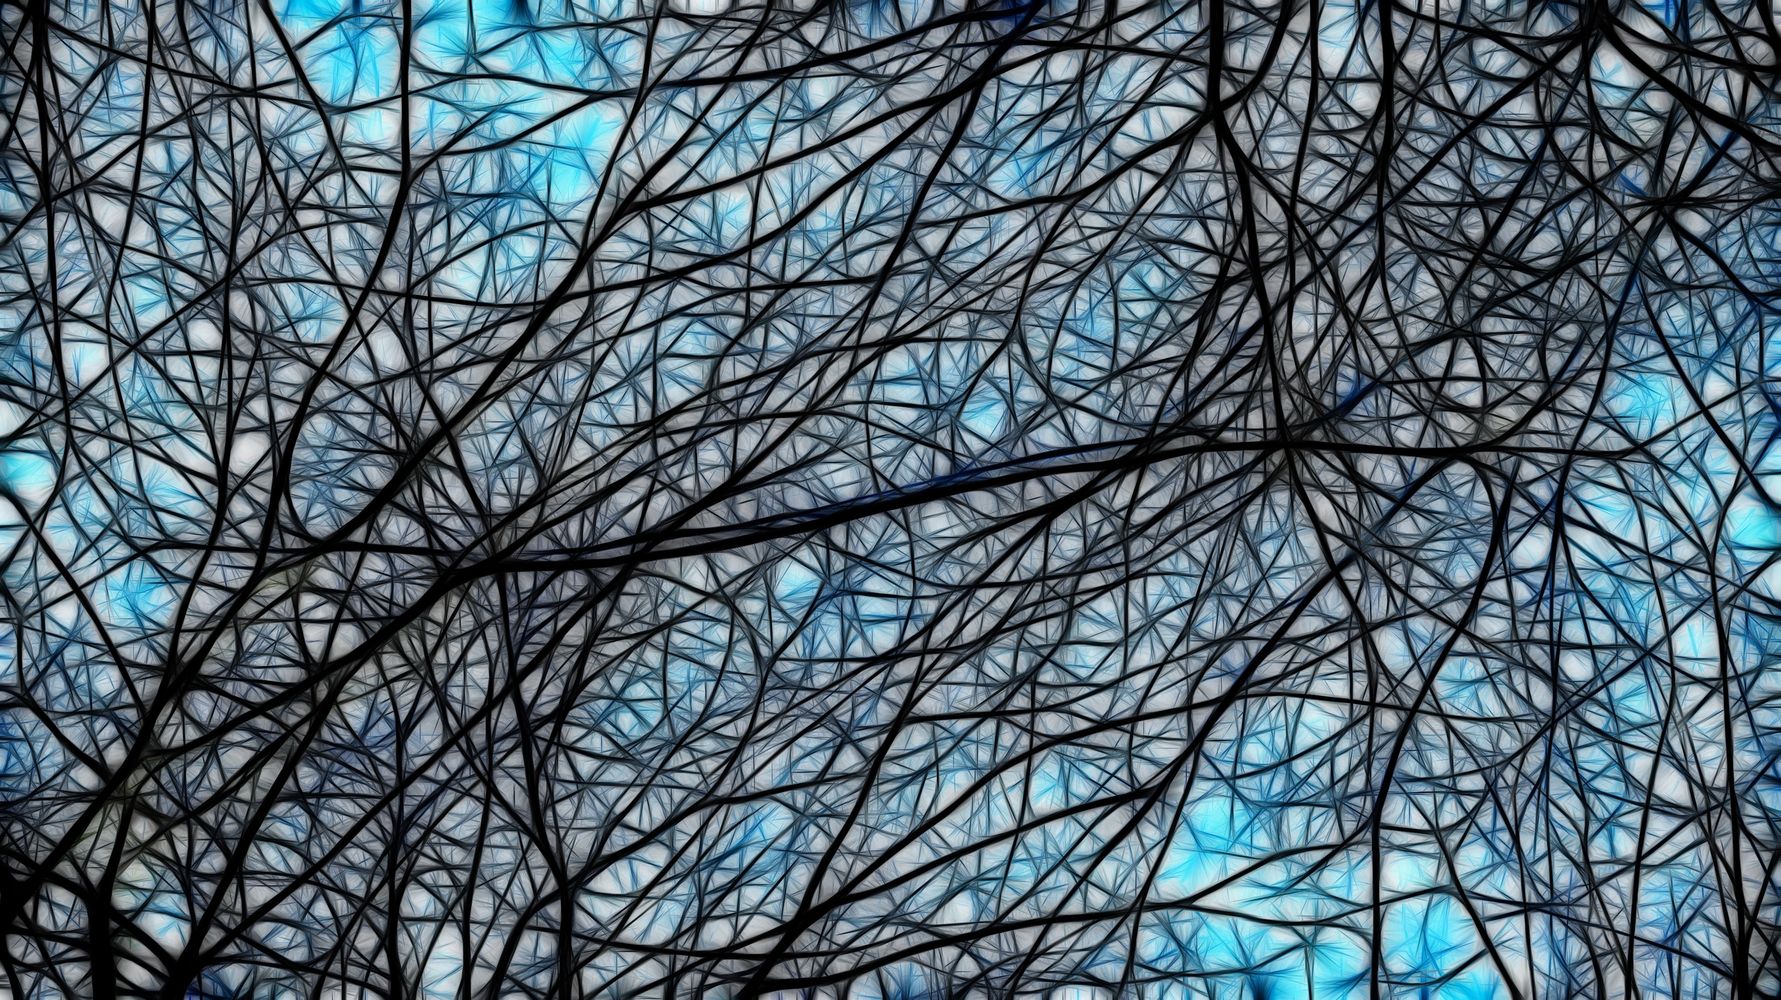 A network of branching stems, black on a light blue background.